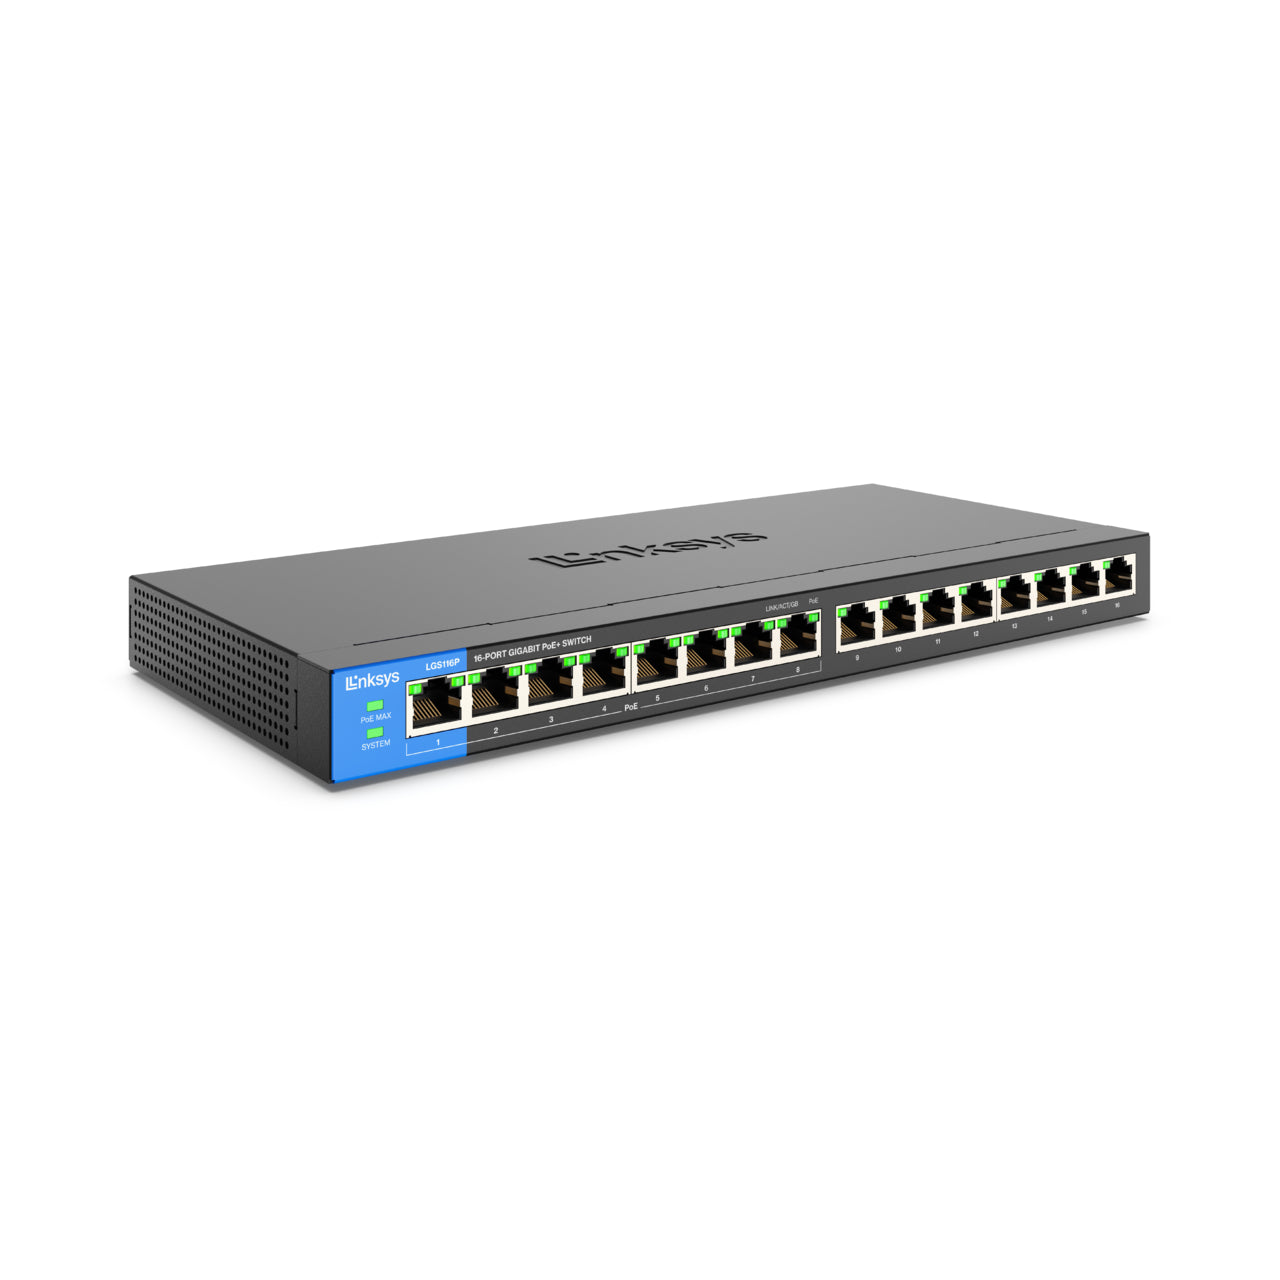 Linksys 16-Port UnManaged Gigabit Switch with 8 PoE+ ports (LGS116P)